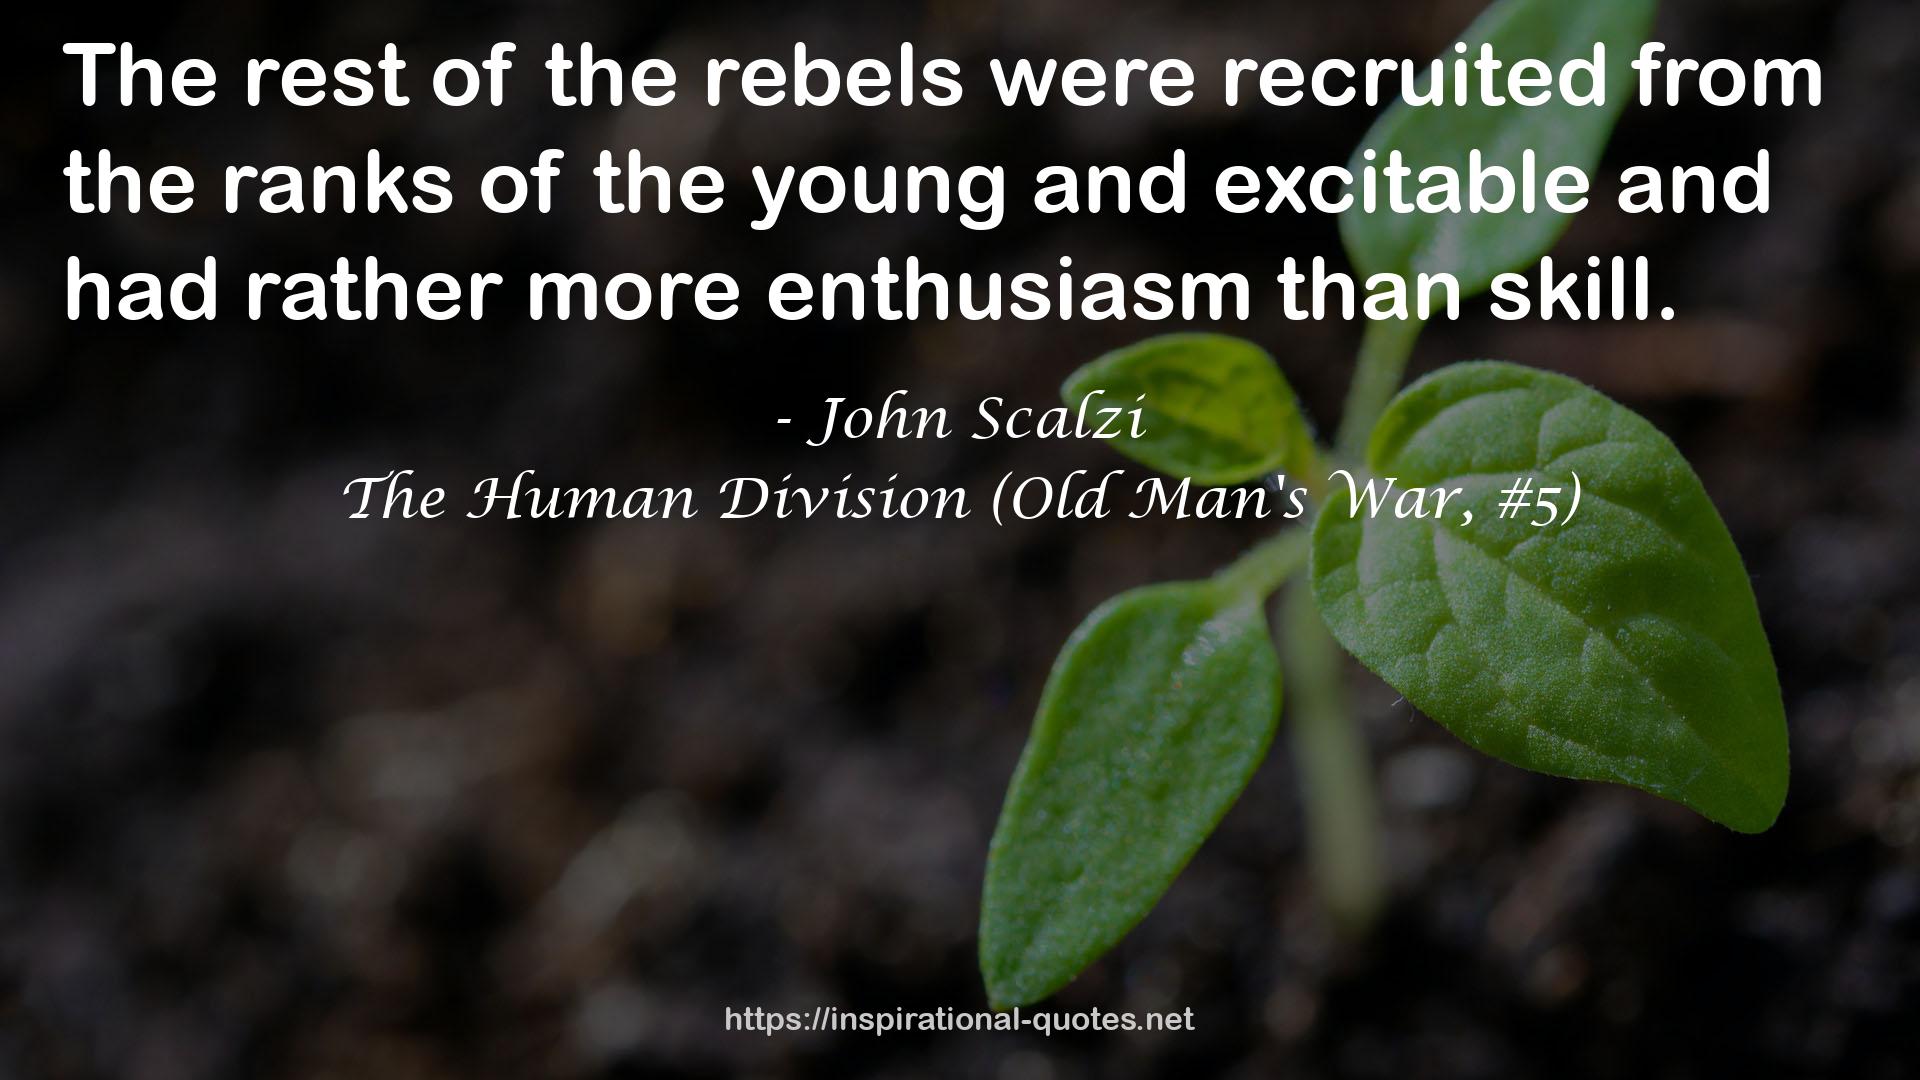 The Human Division (Old Man's War, #5) QUOTES